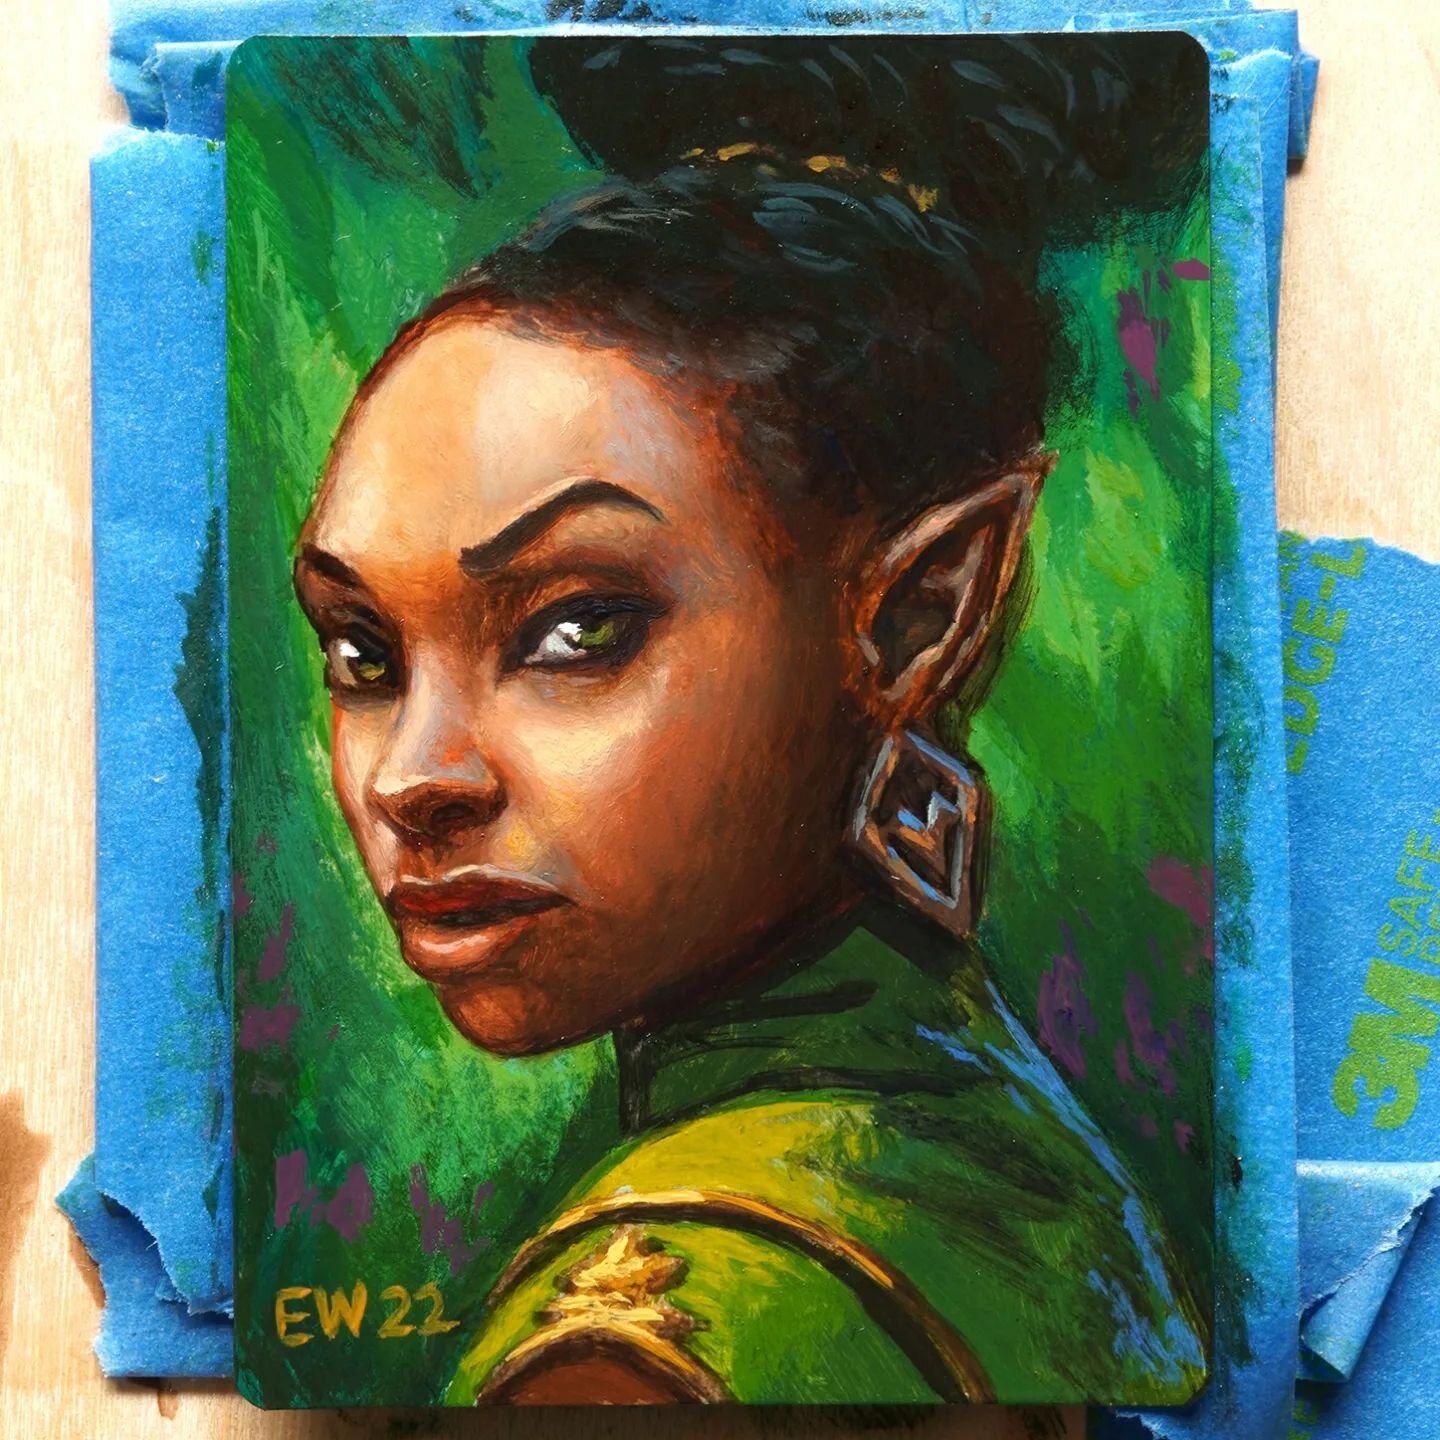 This little artist proof commission is off to a collector that had never seen a painting of a black elf lady before.  A fun quick piece between projects.

Painted on the back of &quot;Amulet of Vigor&quot; magic card AP. 

#mtgartwork&nbsp;#mtgaddict